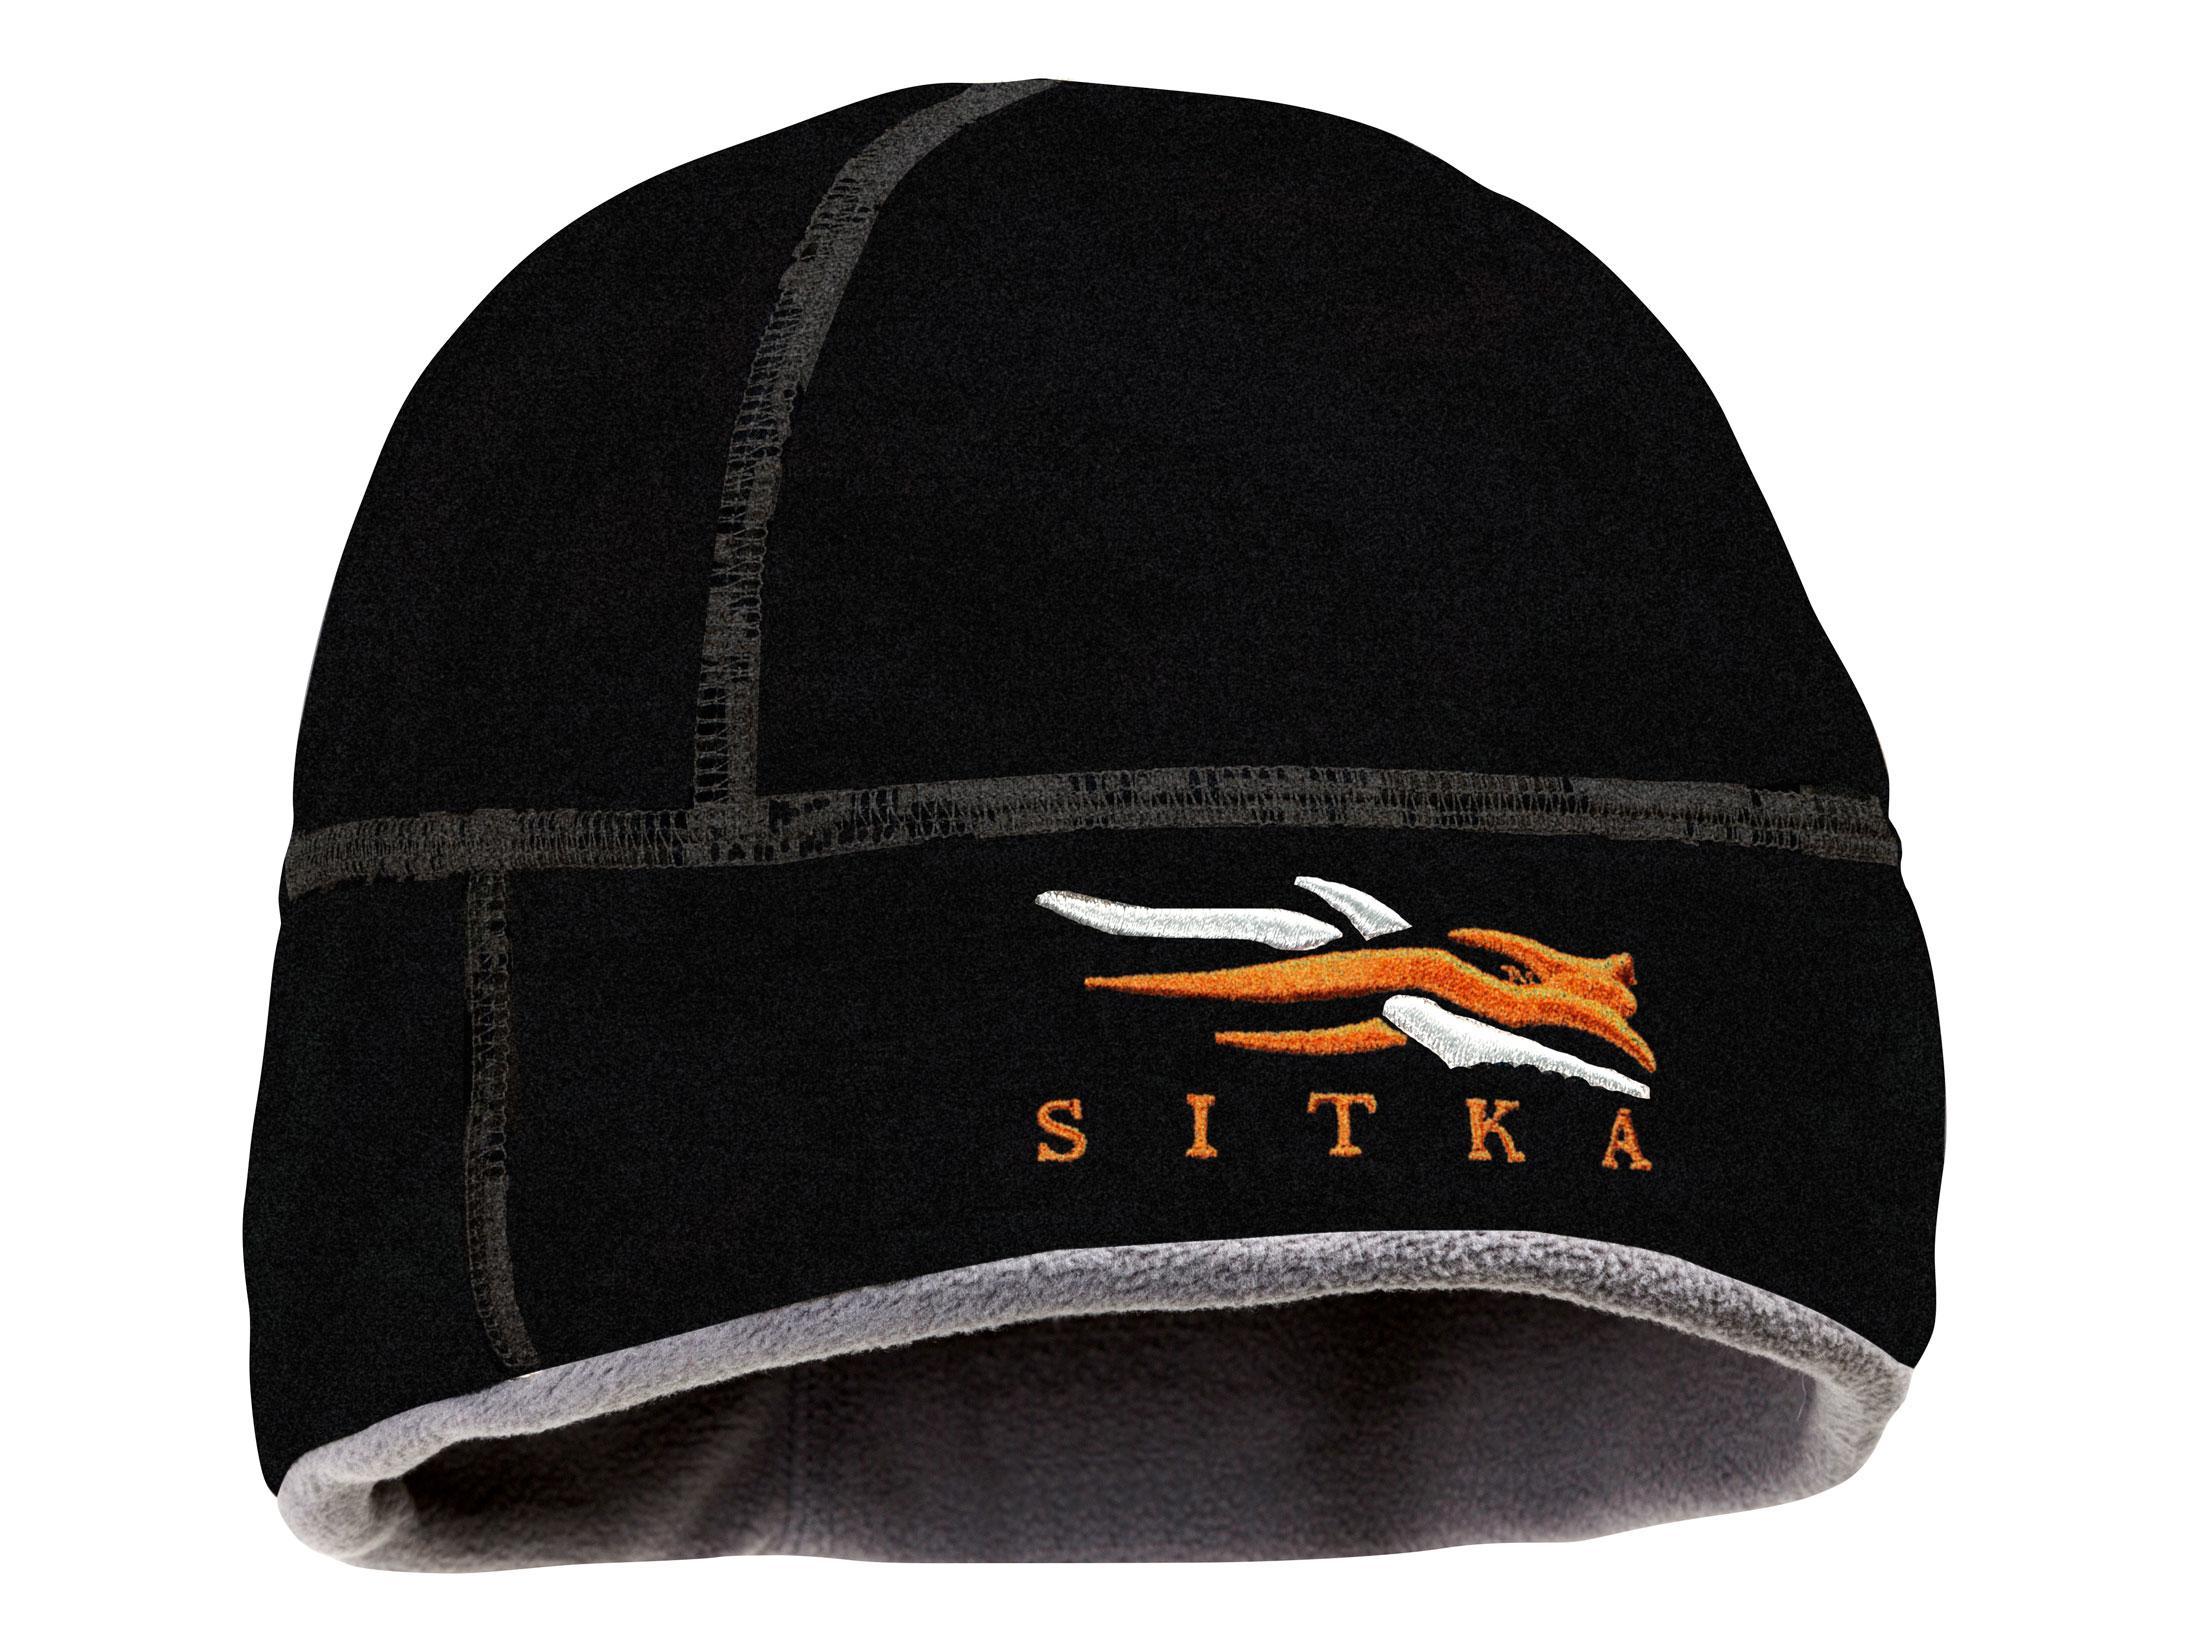 Sitka Gear Reversible WS Beanie Woodsmoke One Size Fits All for sale online 